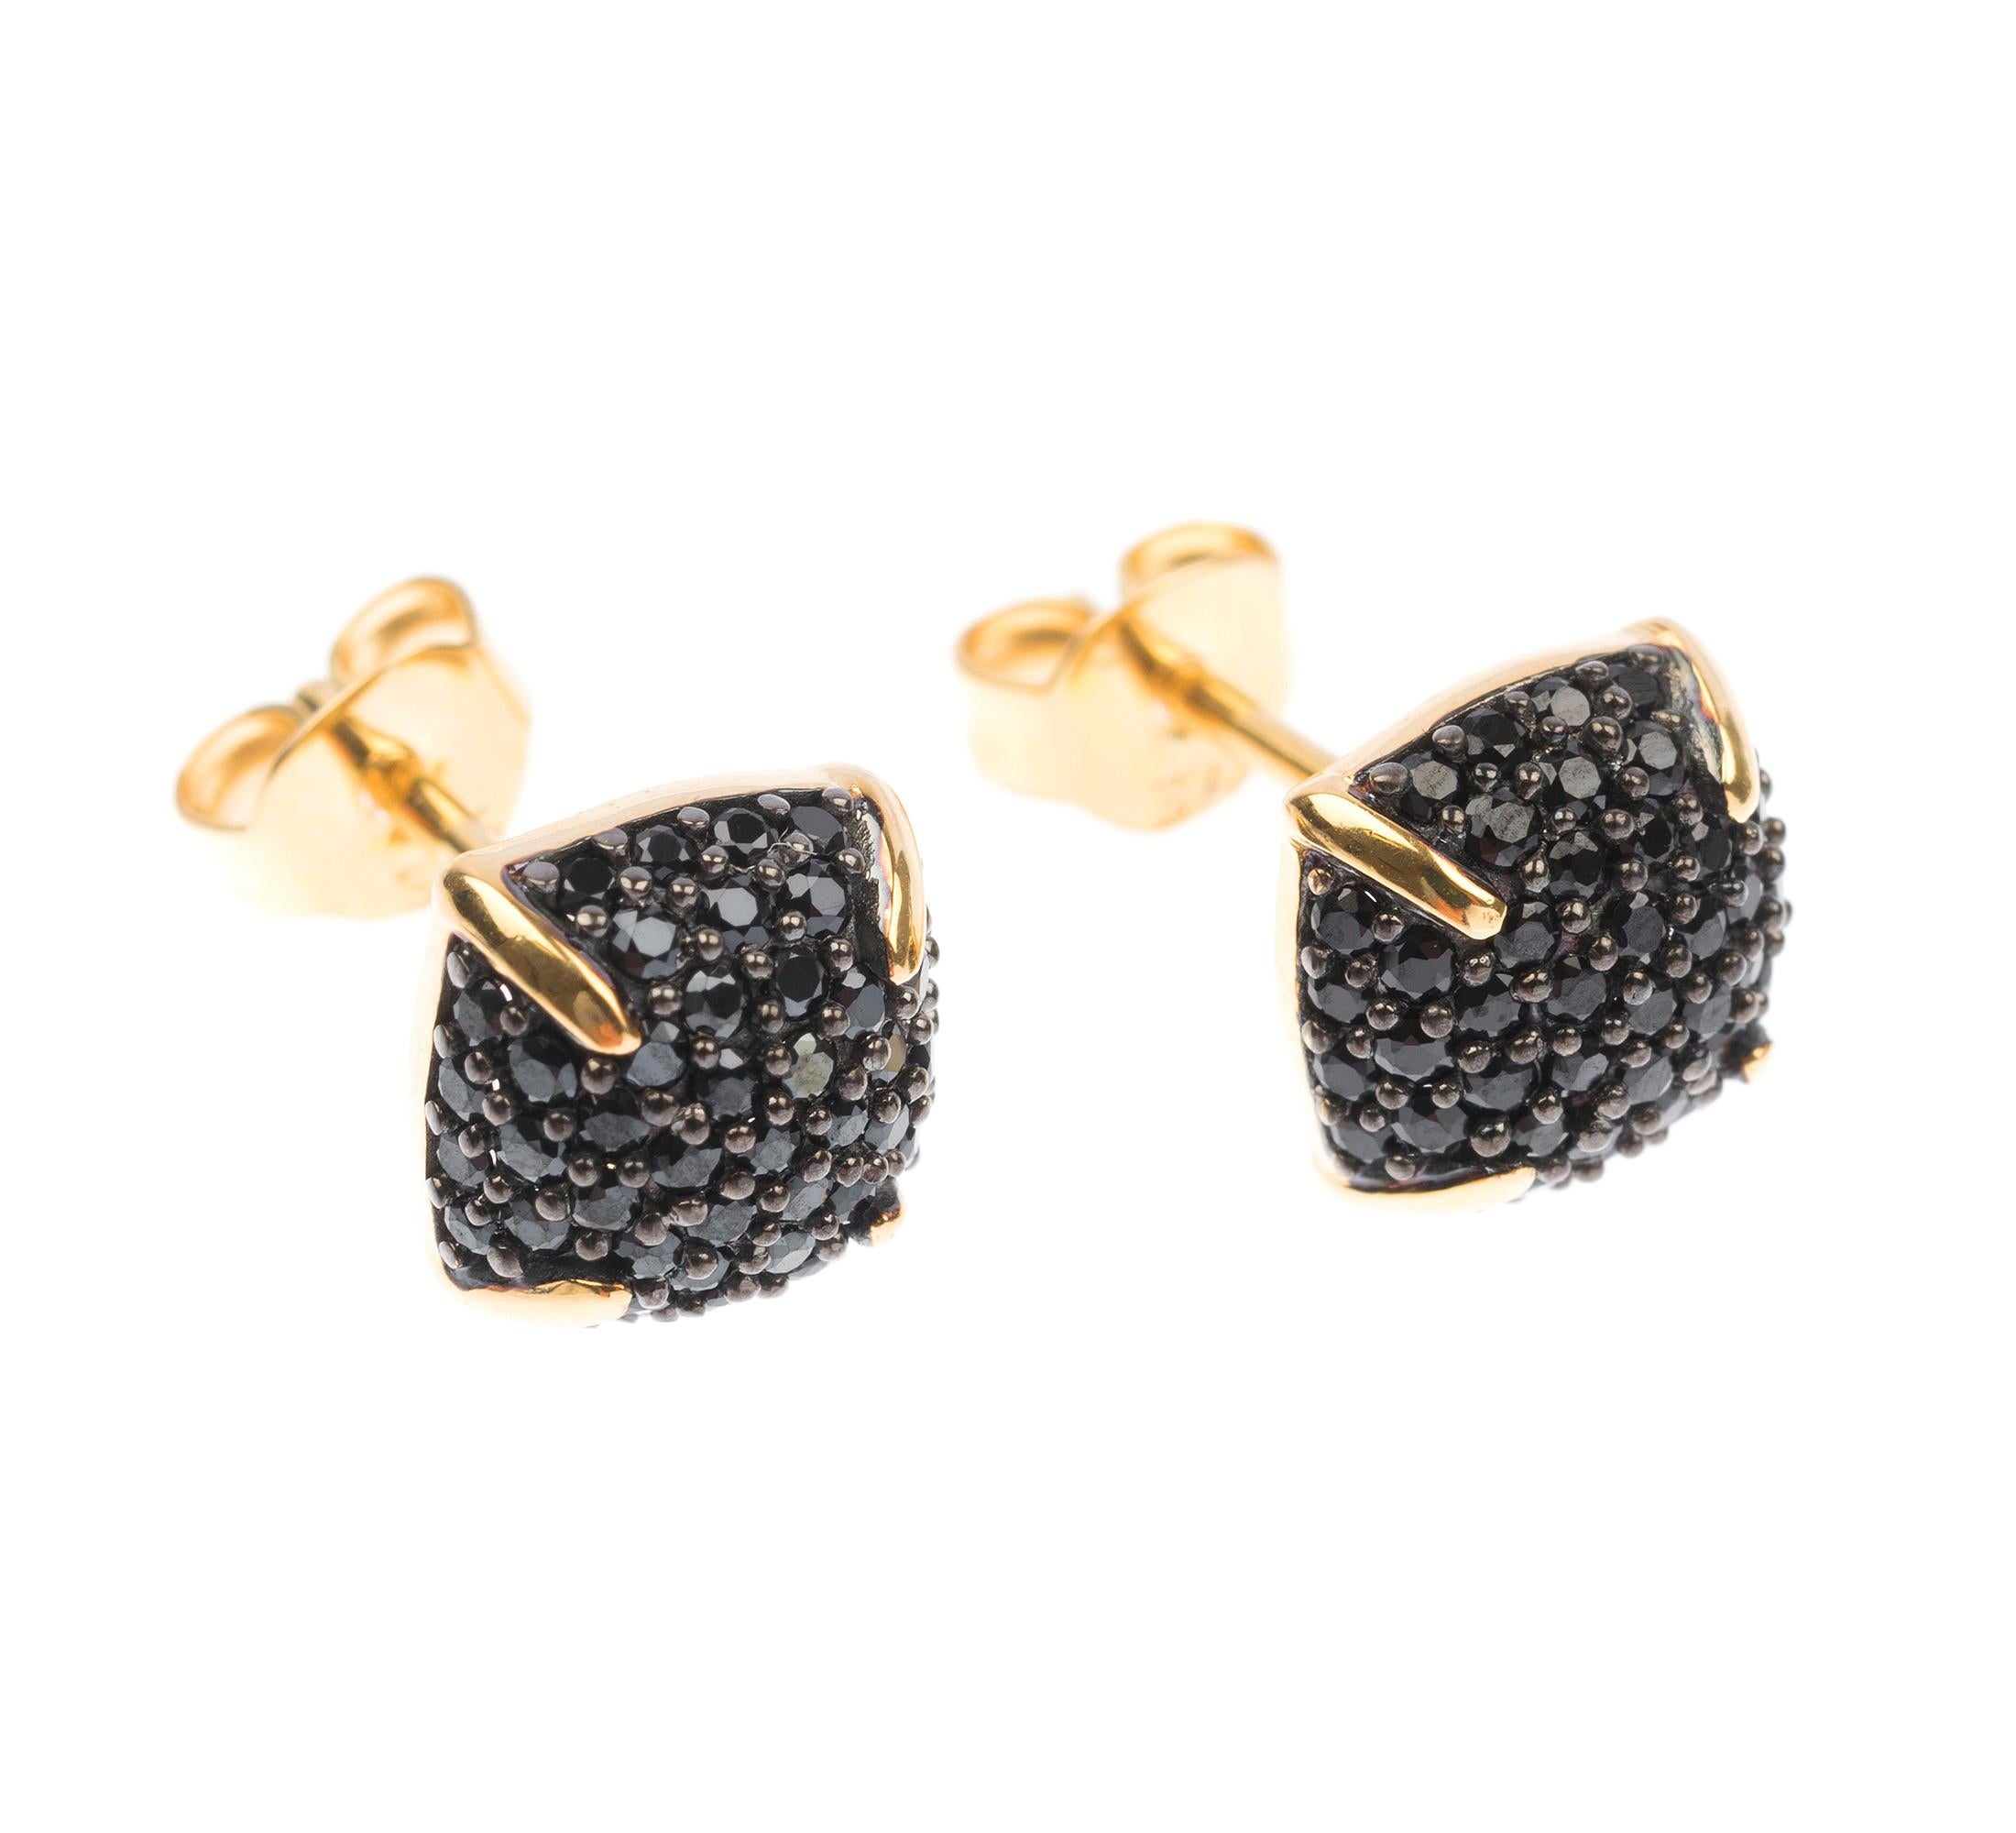 Modern  Limited Edition 9 Carat Yellow Gold Spinel Cluster Earrings